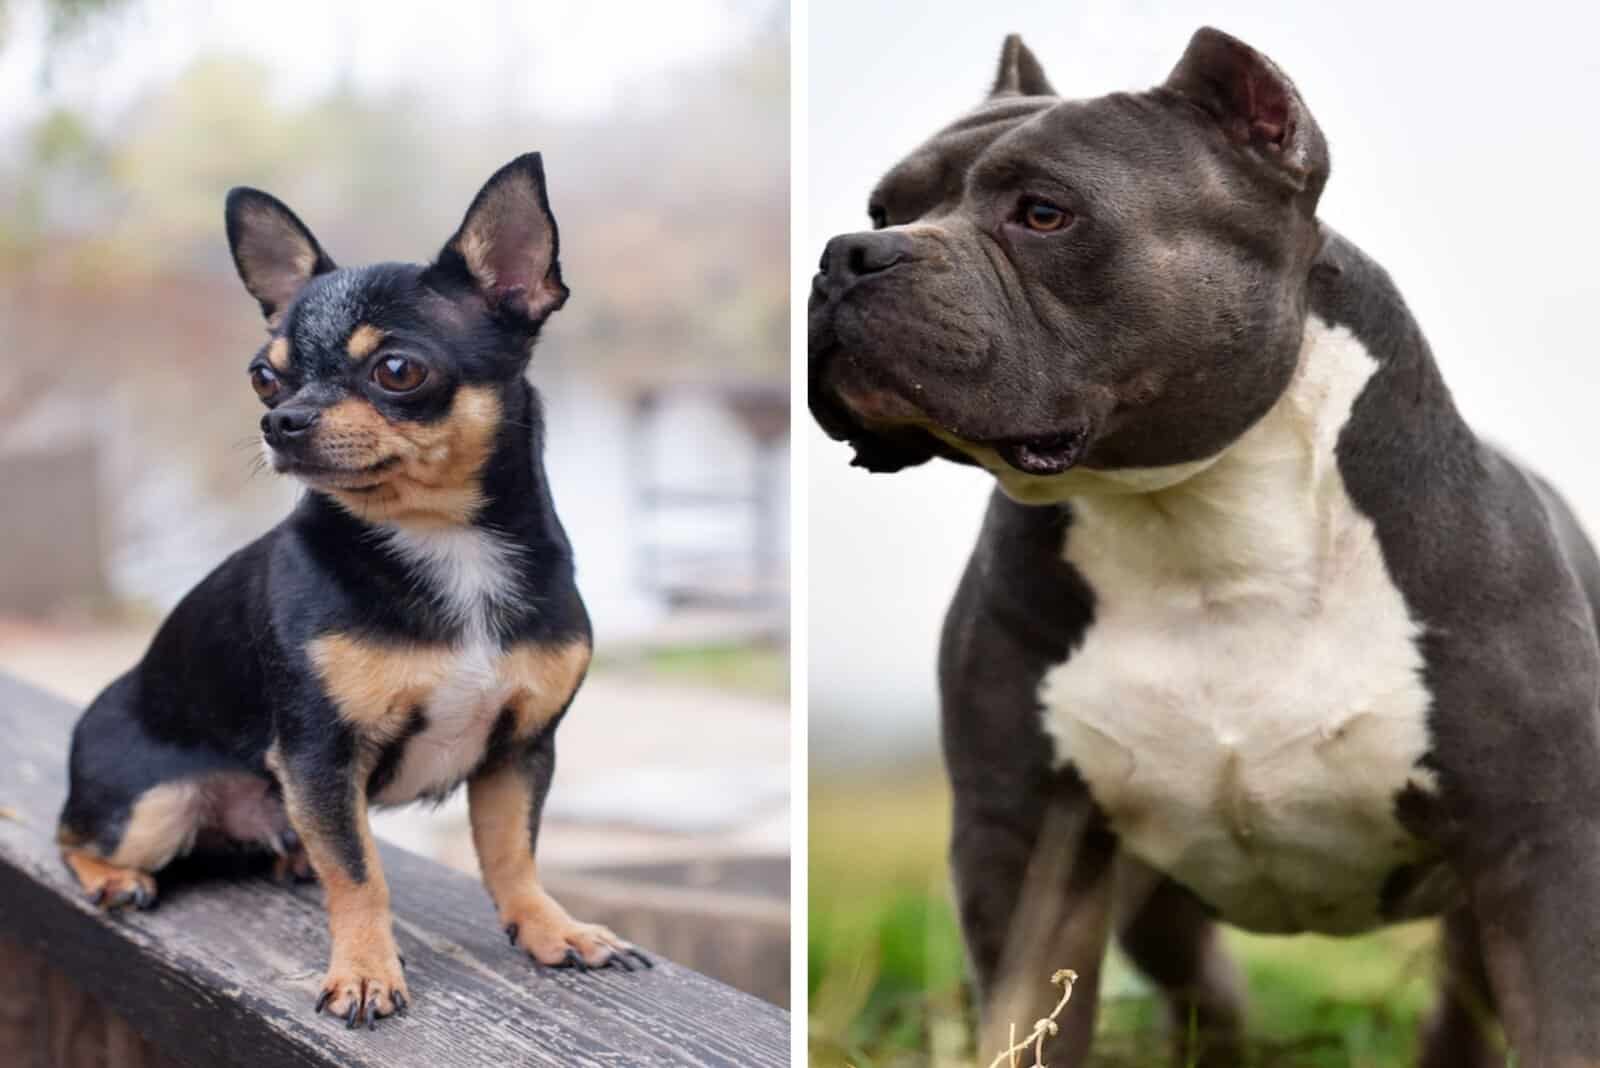 The American Bully and Chihuahua side by side